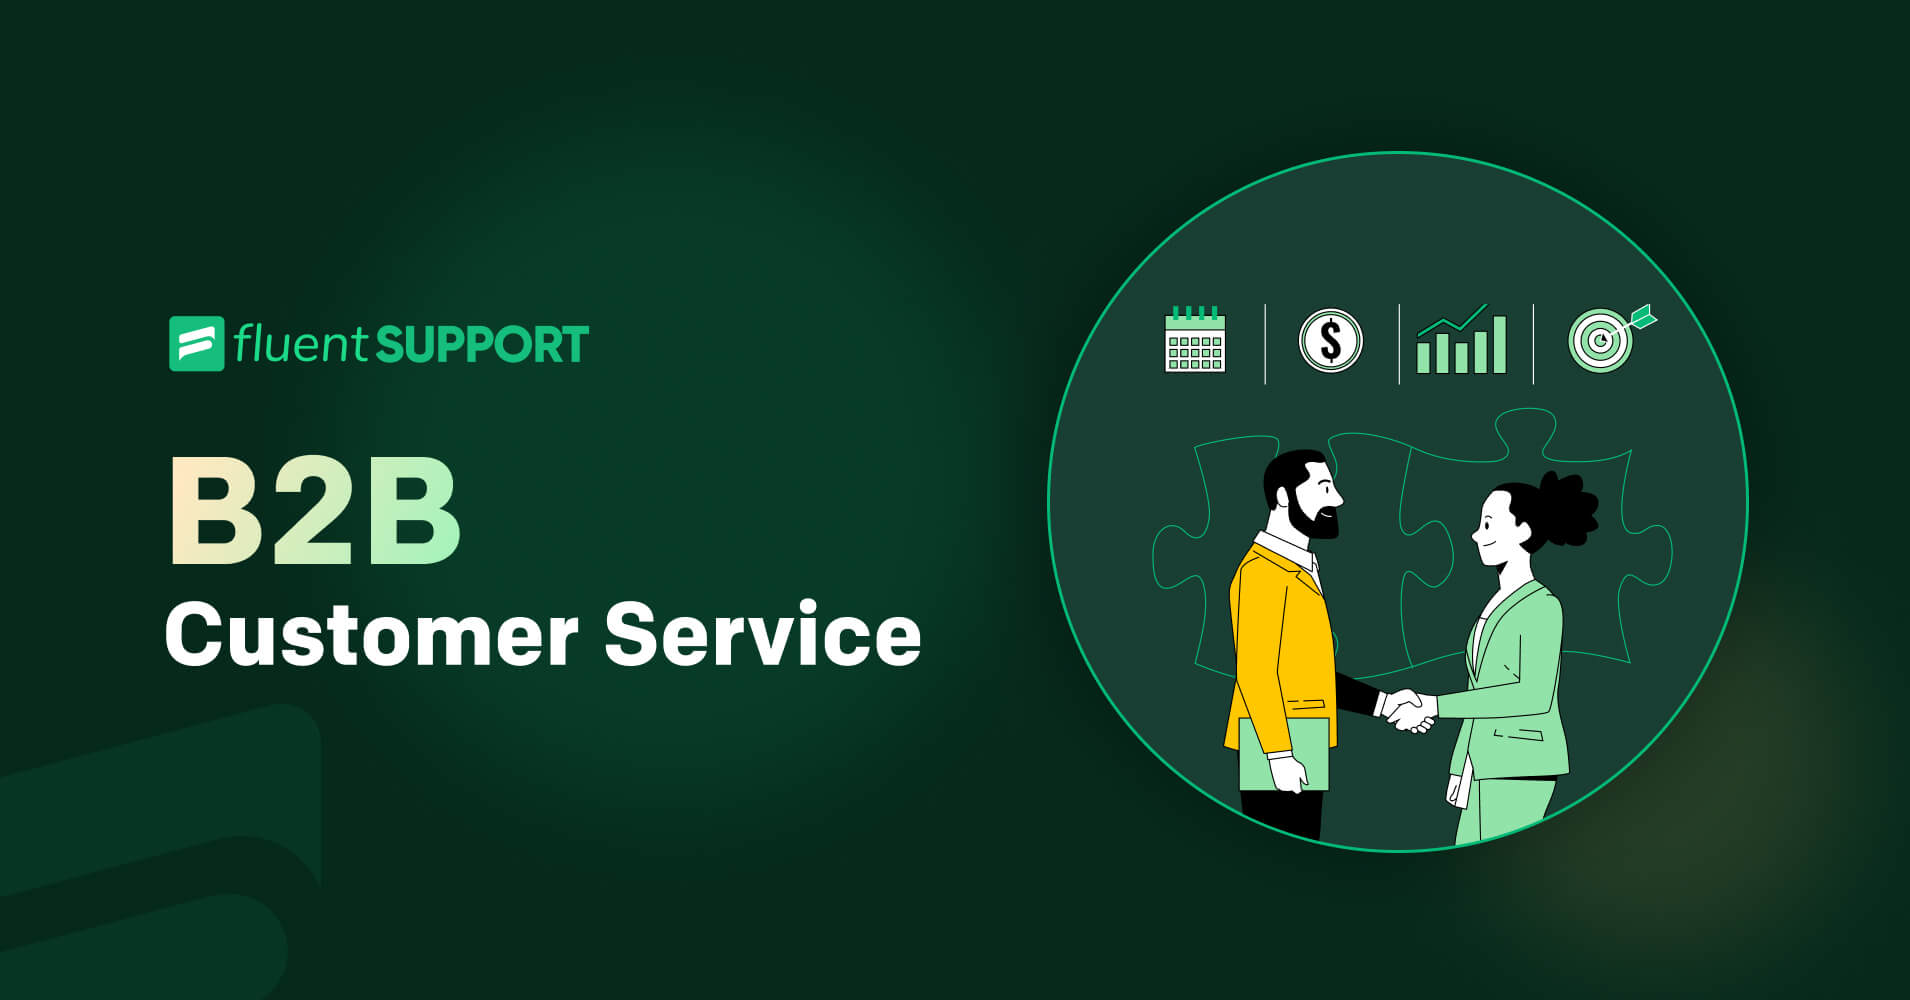 How To Provide Better Customer Service For B2B Customers